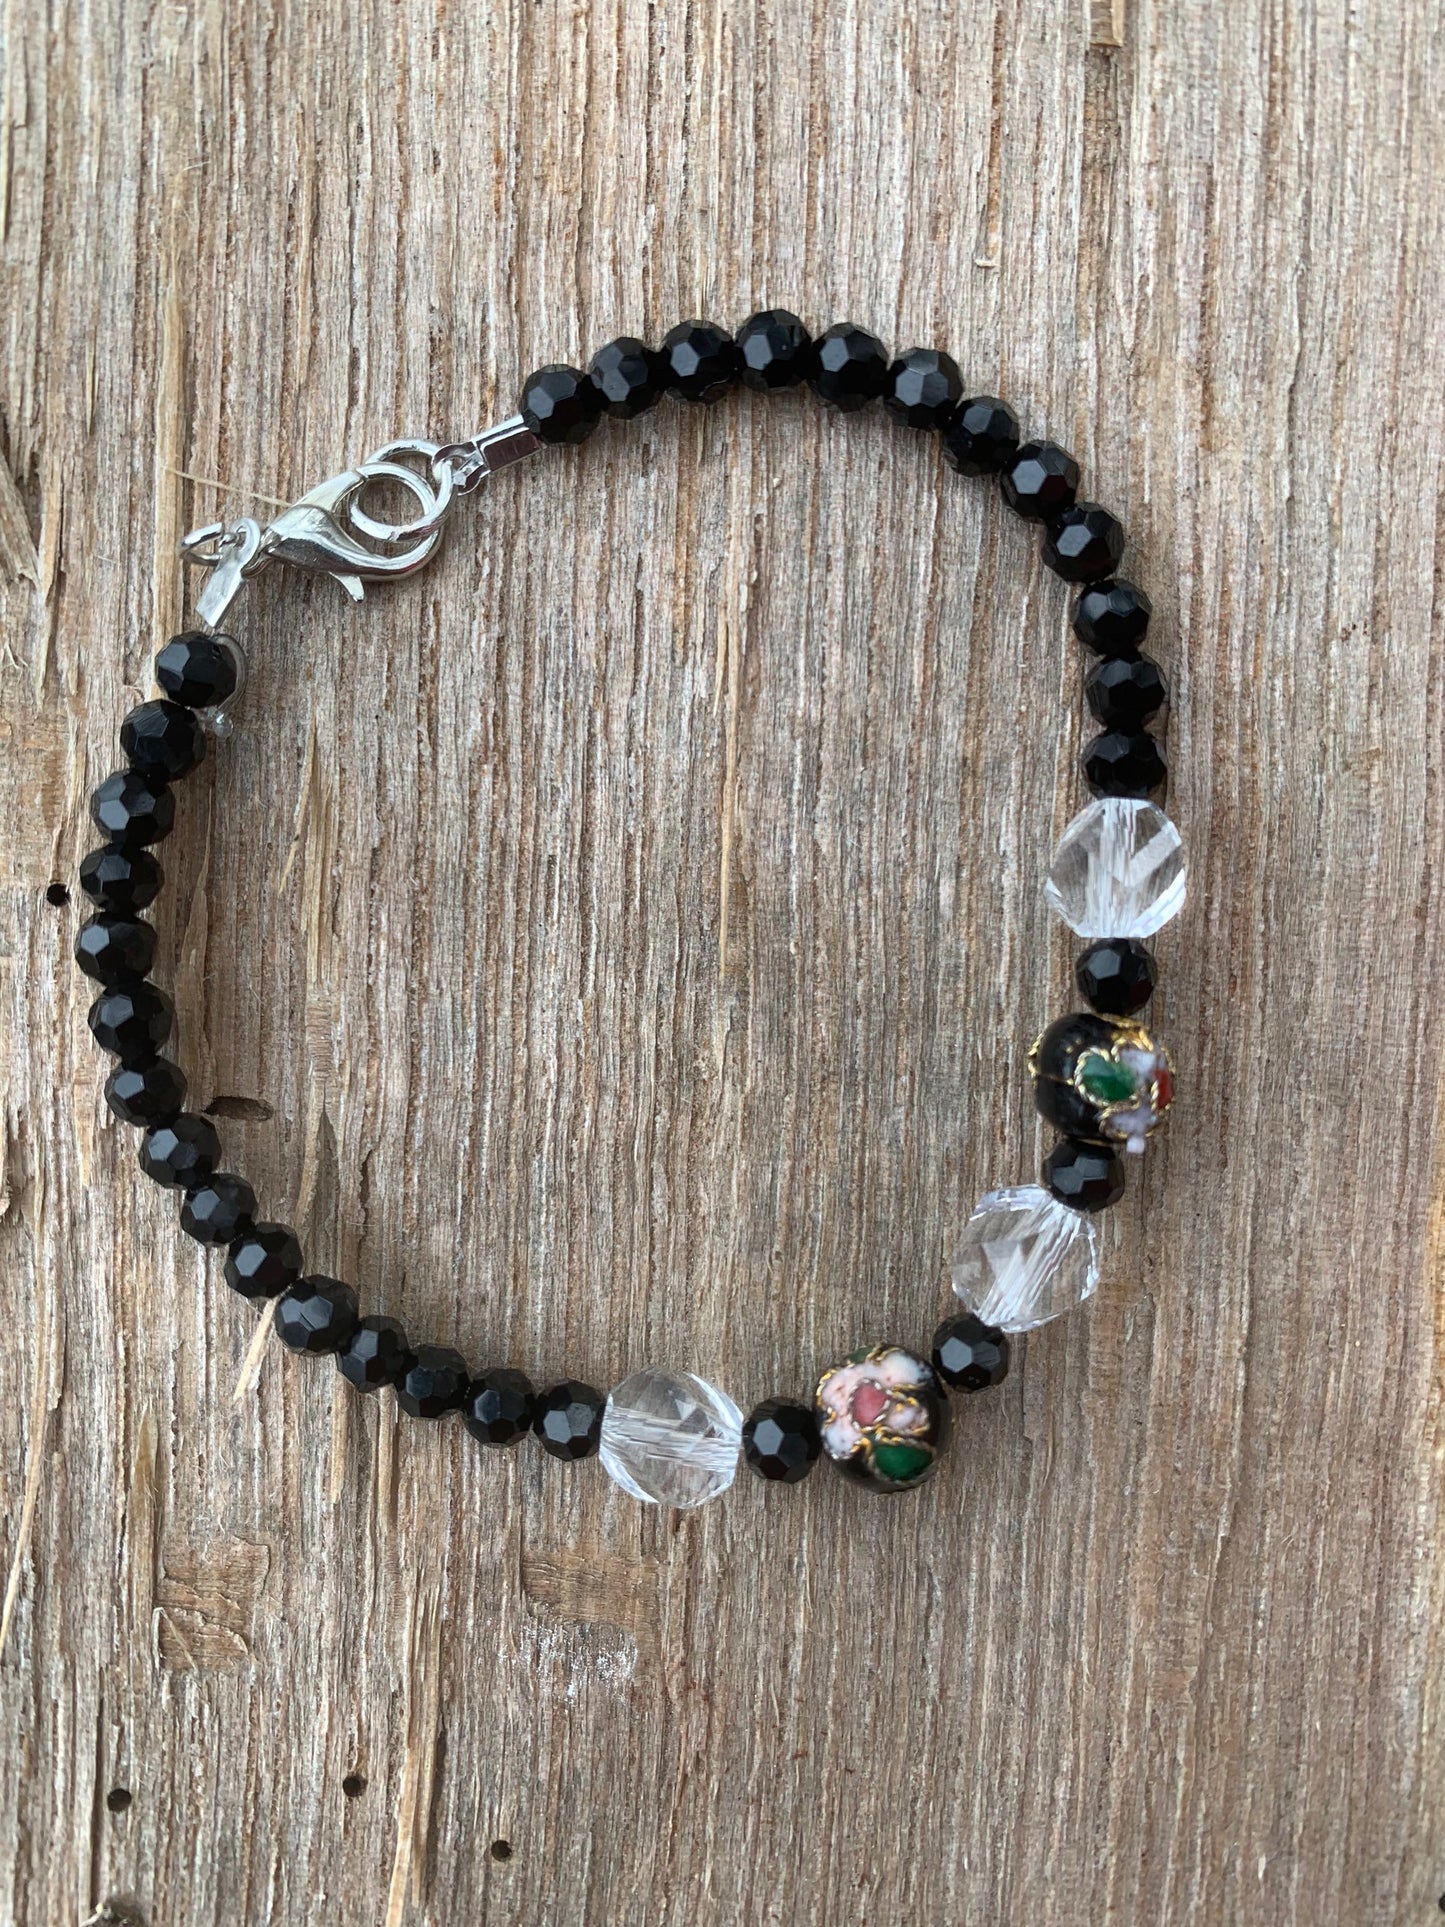 Unique Flower Beaded Bracelet with Clear Crystal and Black Crystal Beads